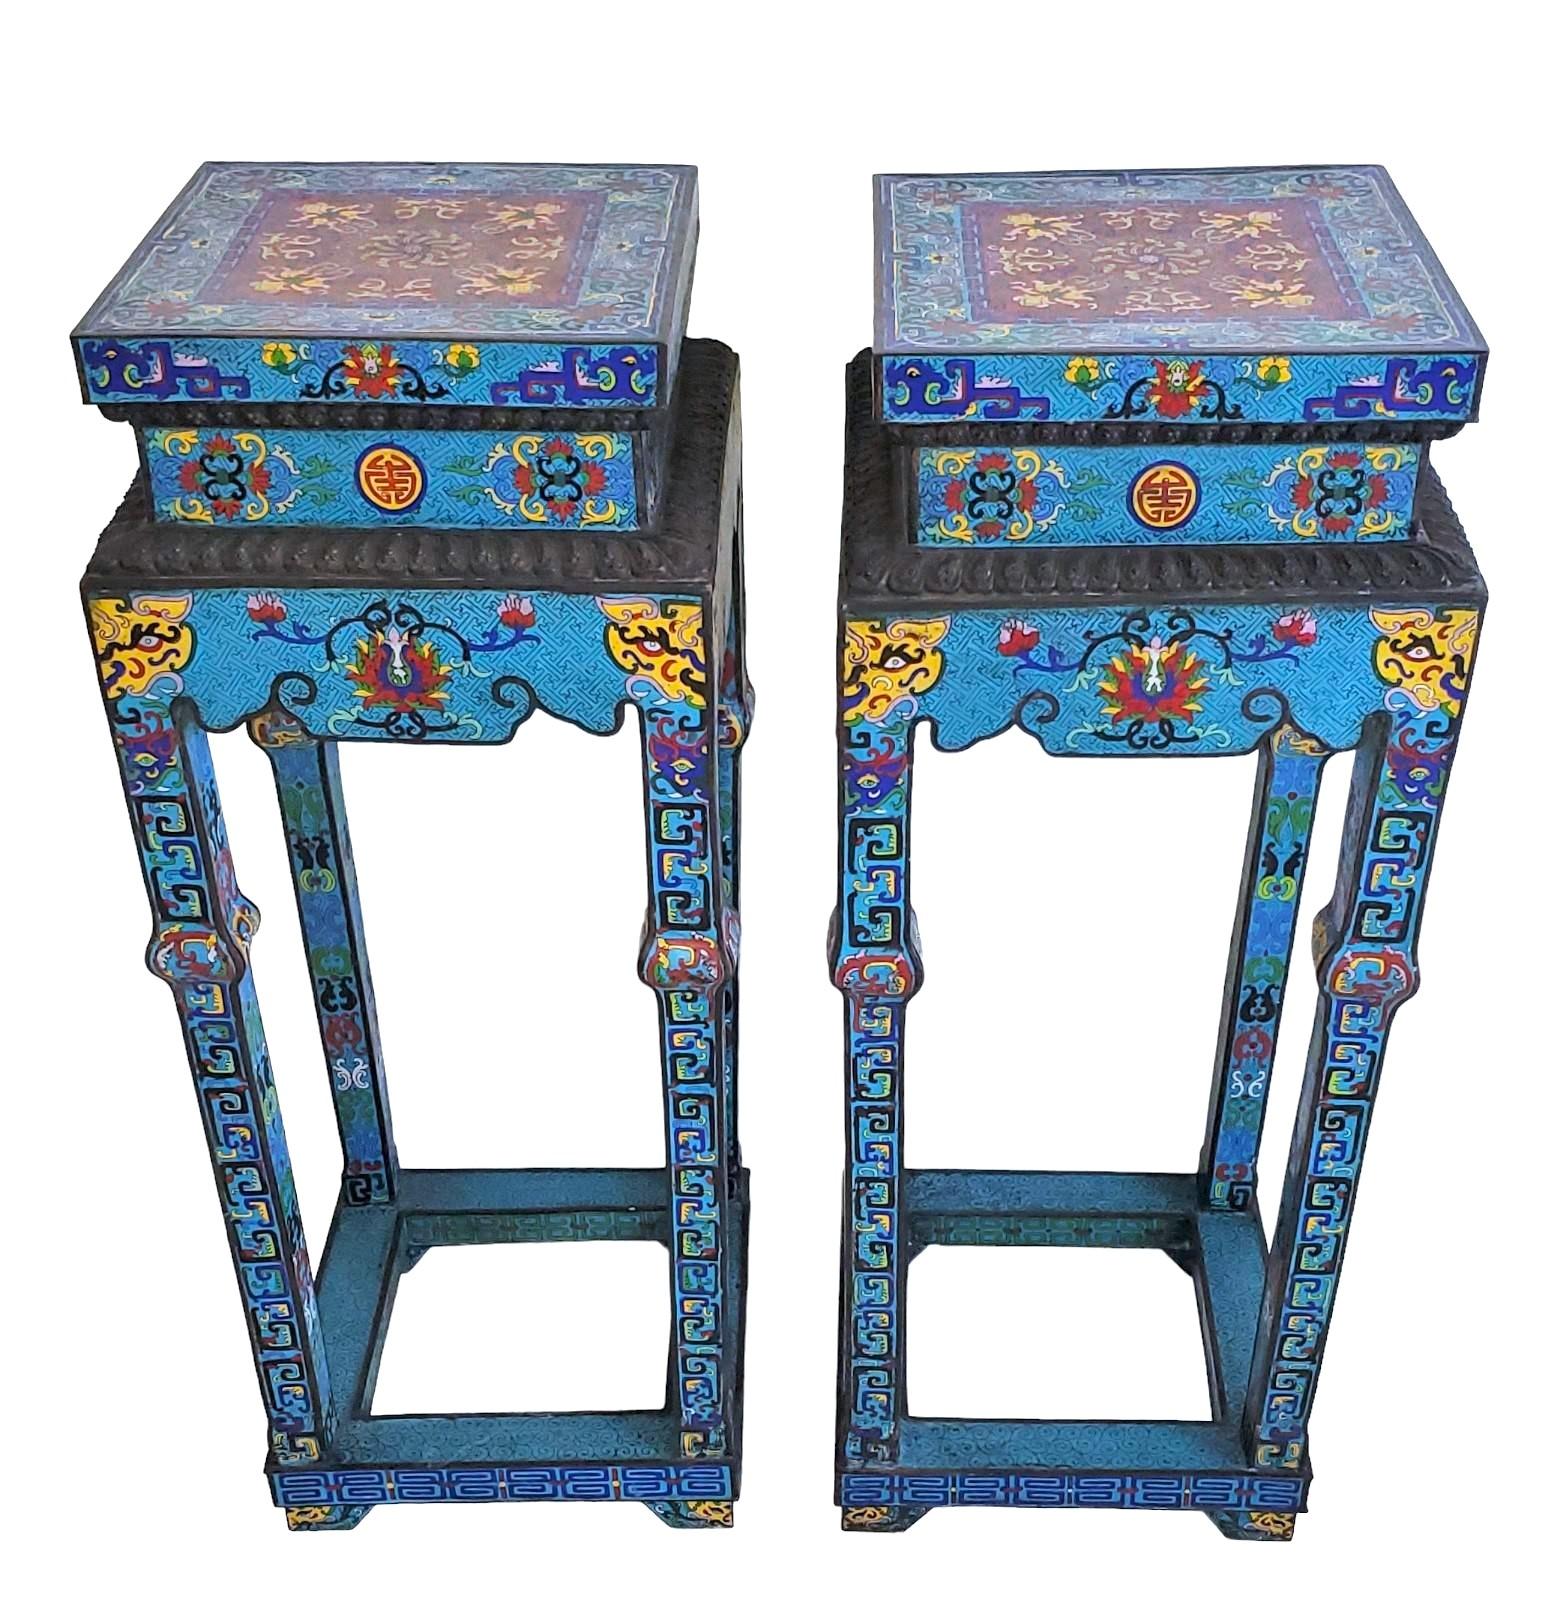 Pair of 1930s Chines Mink Design Cloisonne Pedestal. Wonderful bright colors to the pedestals with a wonderful floral/geometric design.

Minor scratches to surface. Measurements are approximate - 38h x 15d x 15w.